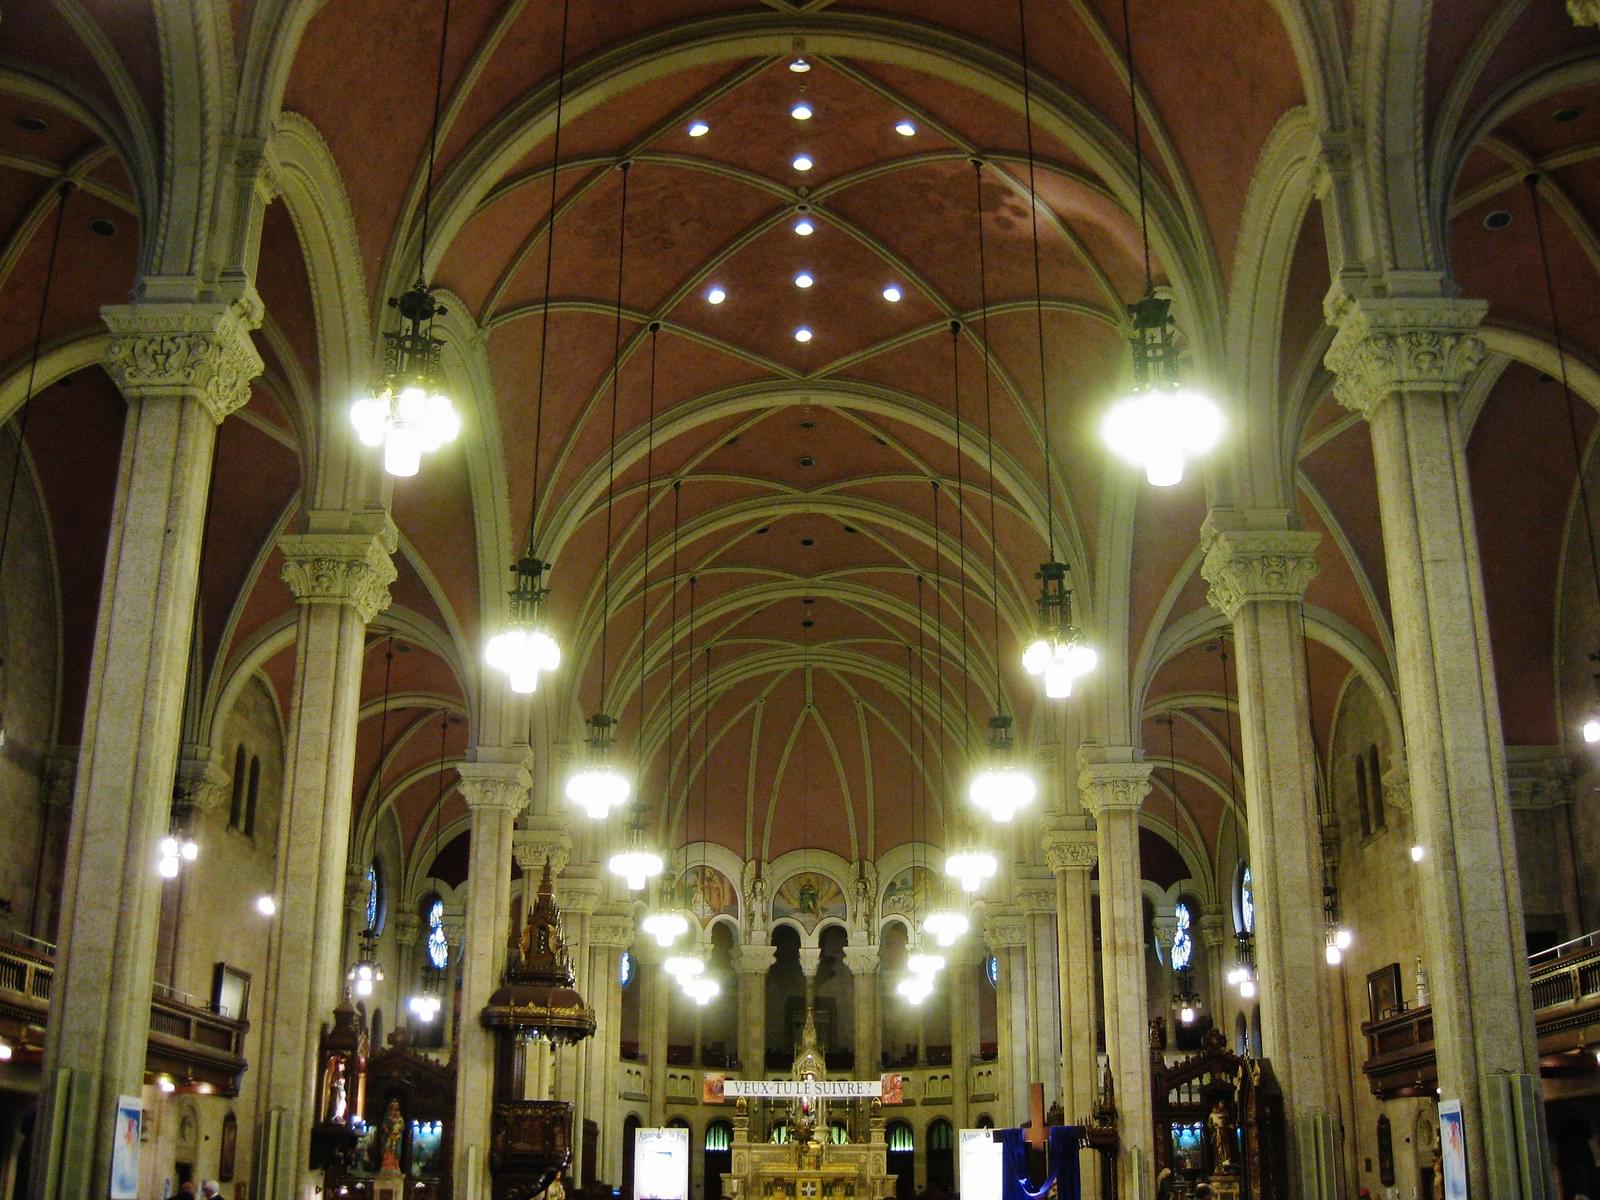 The Nave and Choir